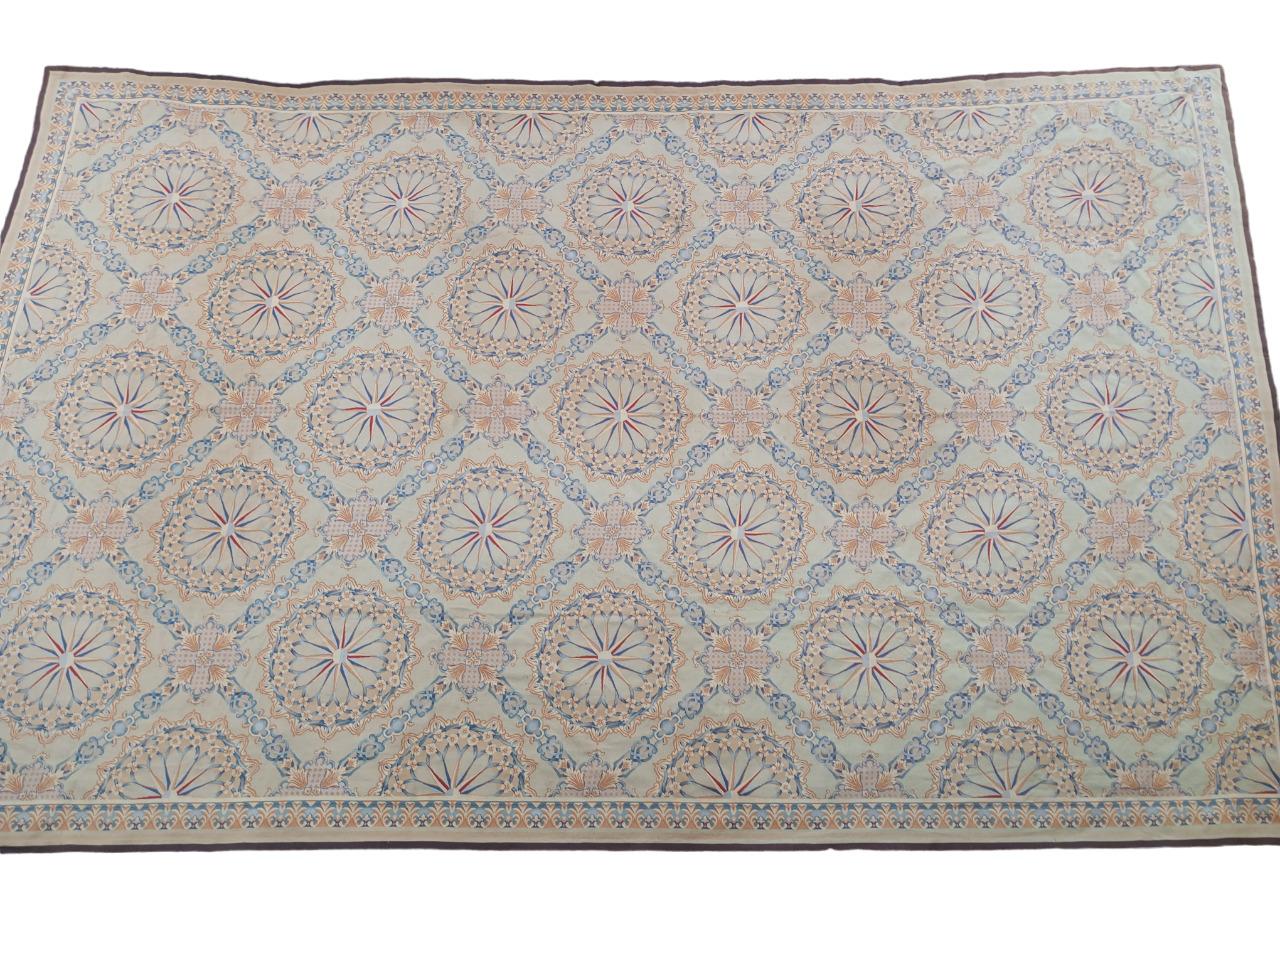 Large needle point rug 670x 430 cm. with continuous pattern from the '80s. 
Vintage France Style, handmade in China in the '80s. Large size, measuring 6.70 m x 4.30 m, featuring various shades of blue, beige, and a touch of deep brown. The